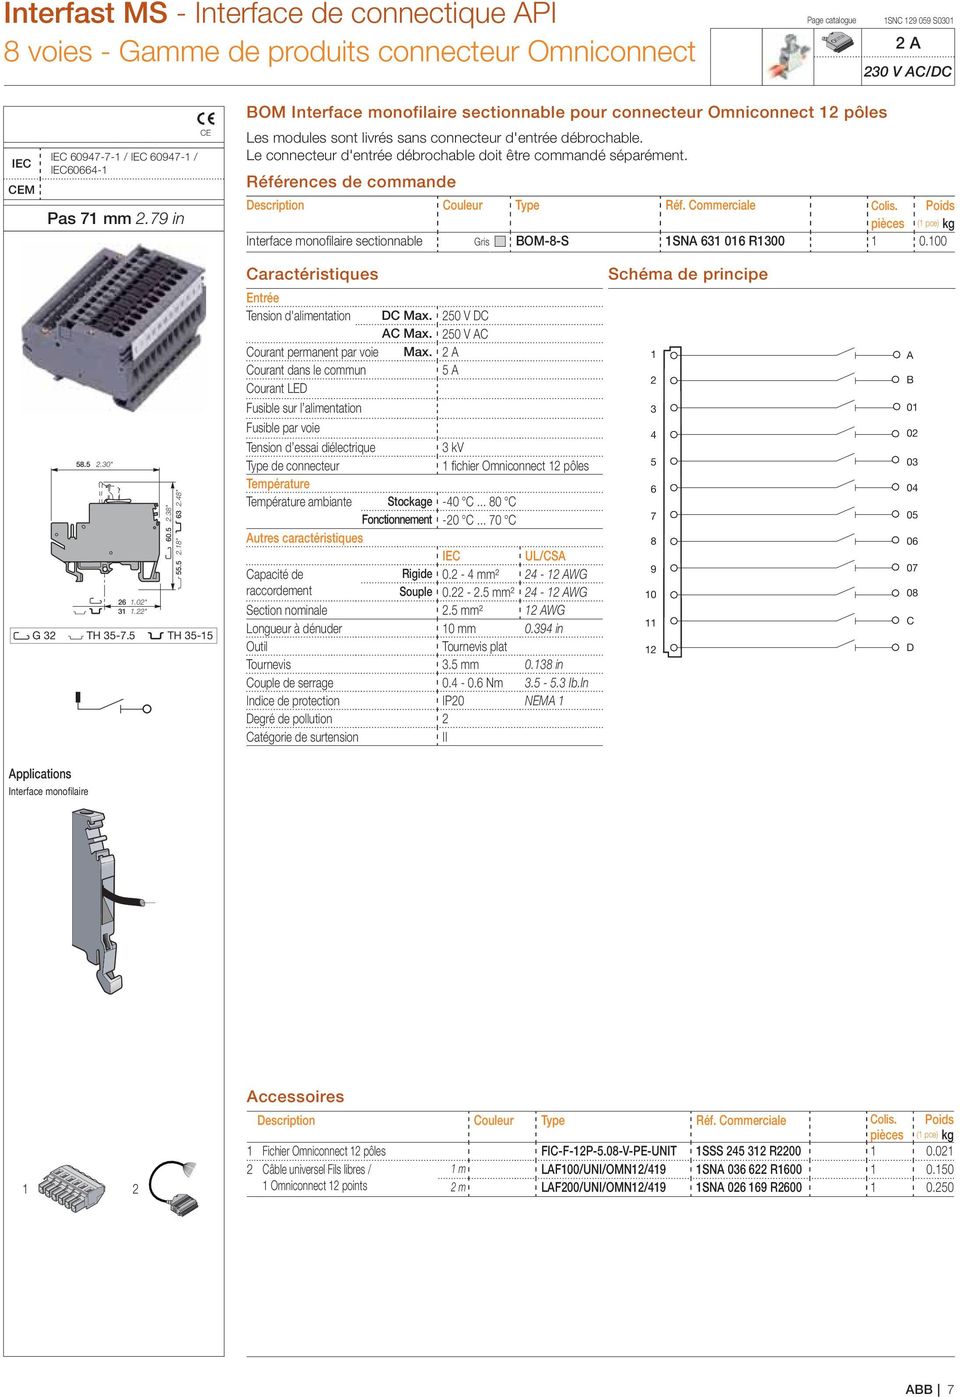 pièces ( pce) kg Interface monofilaire sectionnable Gris OM--S SN 0 R00 0.00..0".0"." 0..".."." G TH -. TH - Tension d'alimentation Max. 0 V Max. 0 V ourant permanent par voie Max.